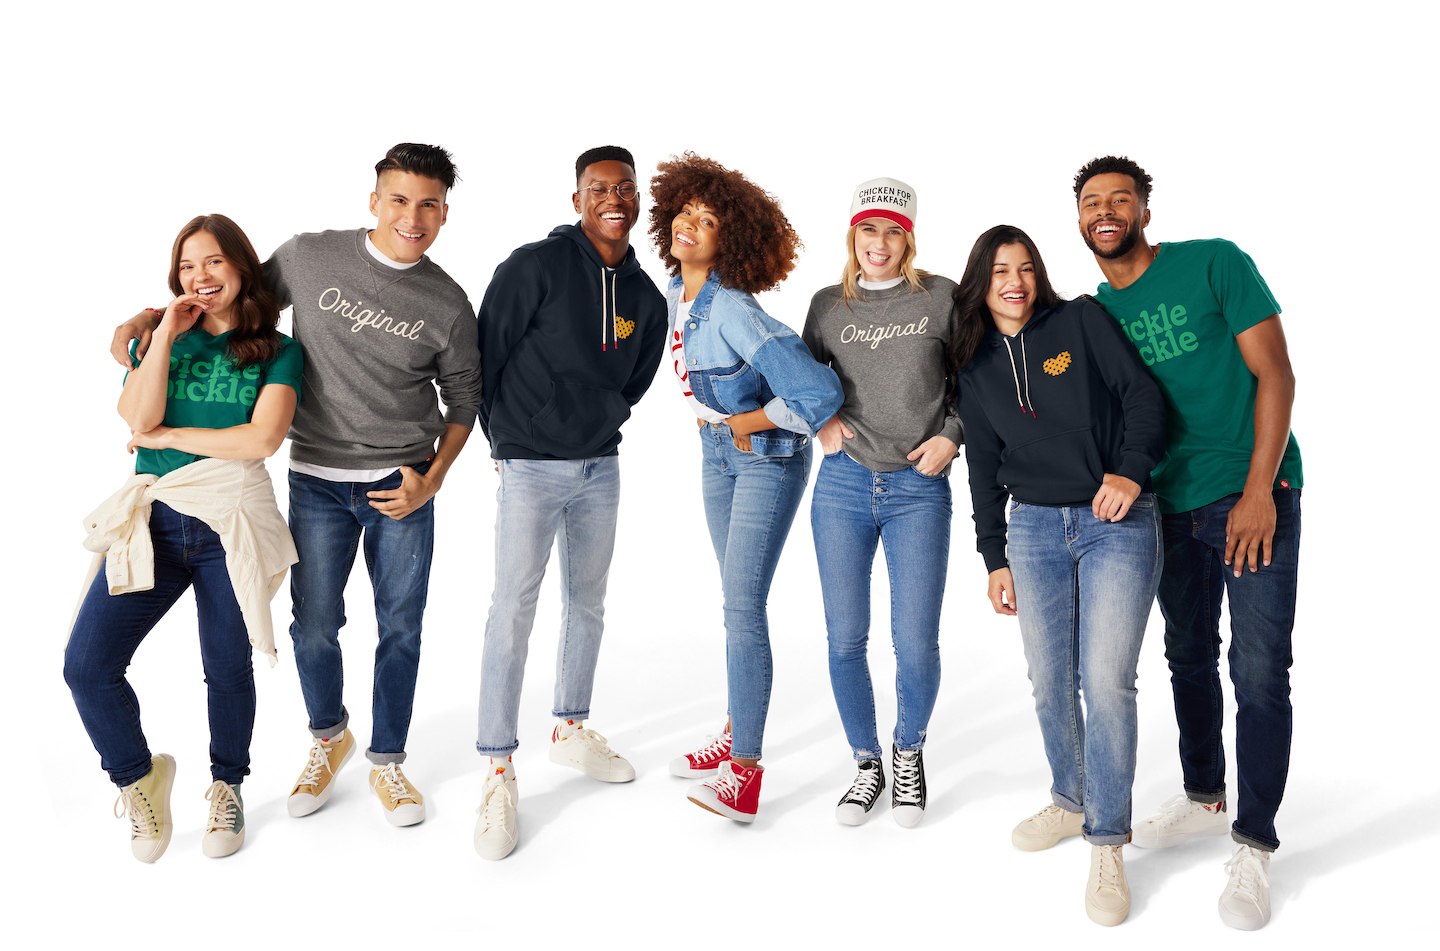 Group of people standing together and wearing clothing from the Chick-fil-A Originals Collection